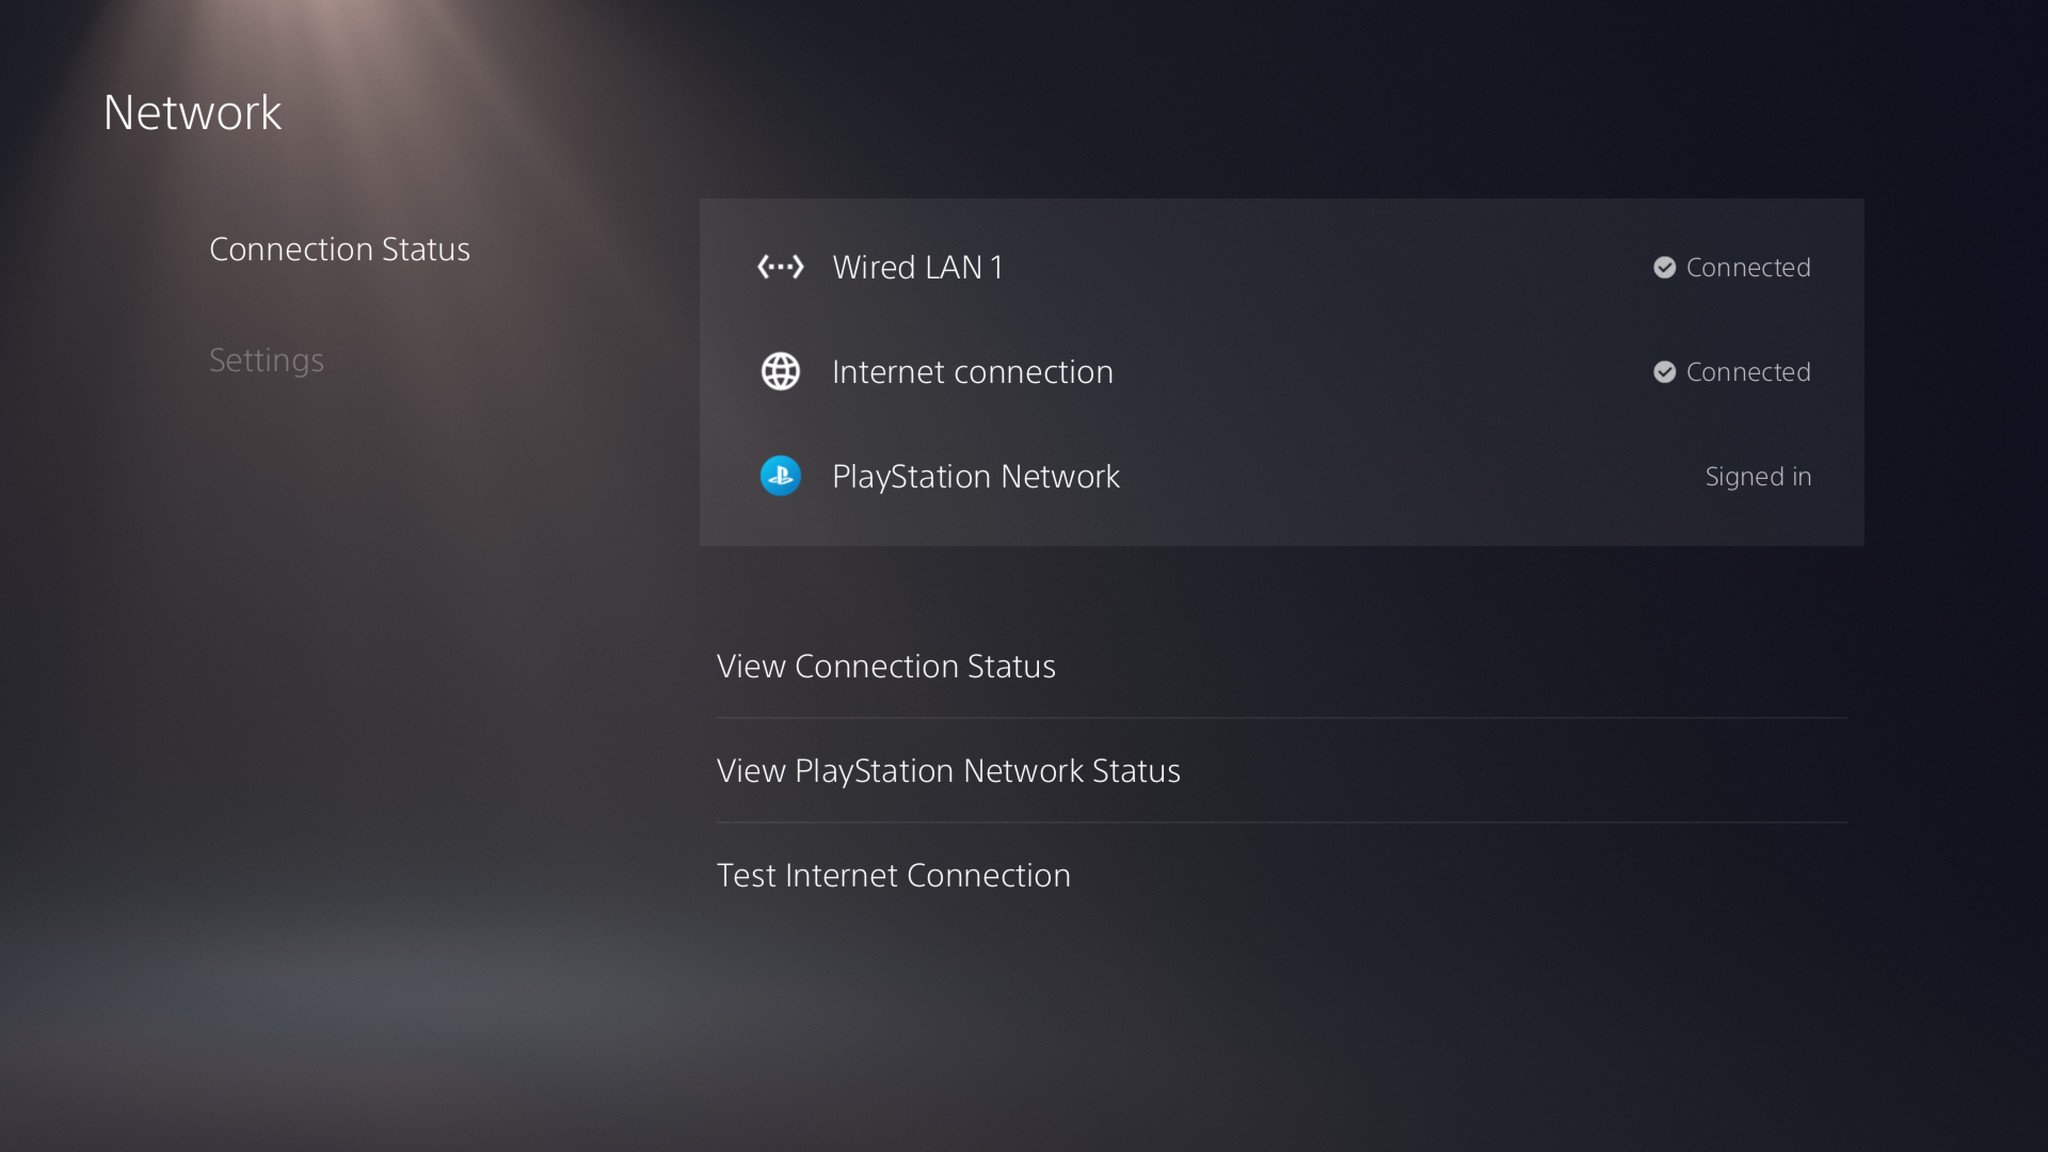 what is a good connection speed for ps5 download